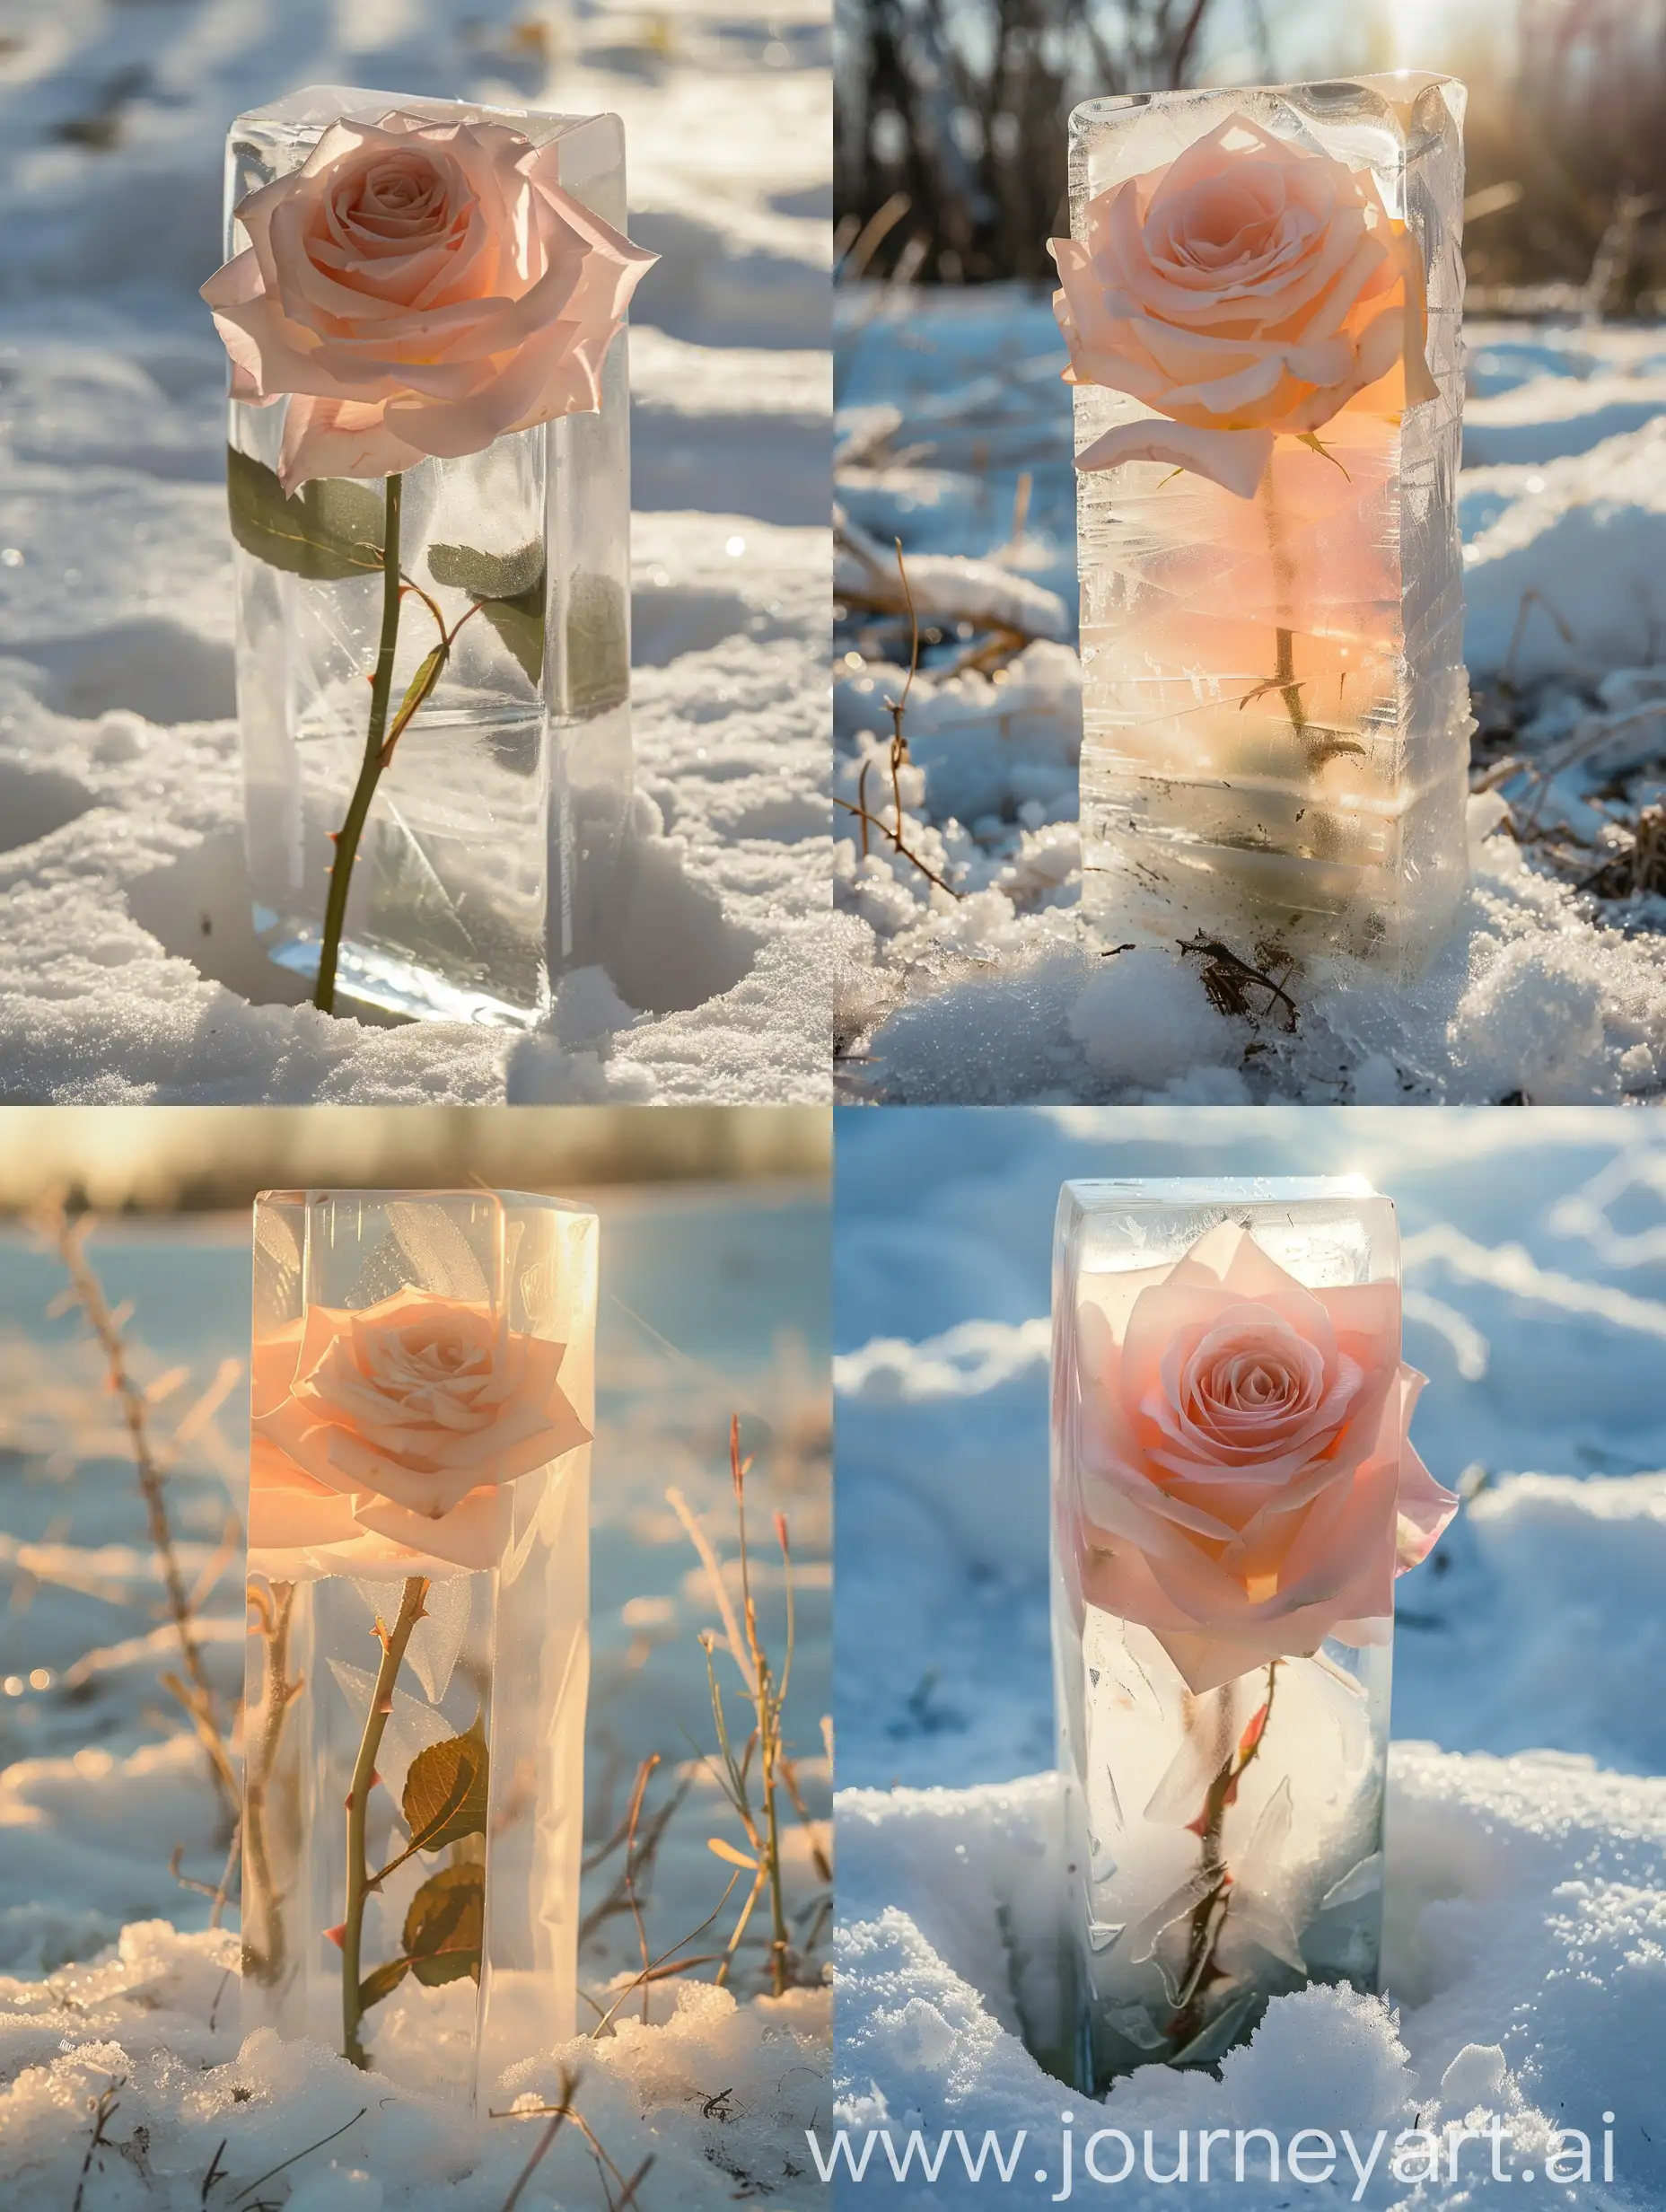 Ethereal-Pink-Rose-Blooming-in-Ice-Serene-Floral-Delight-on-Snowy-Canvas